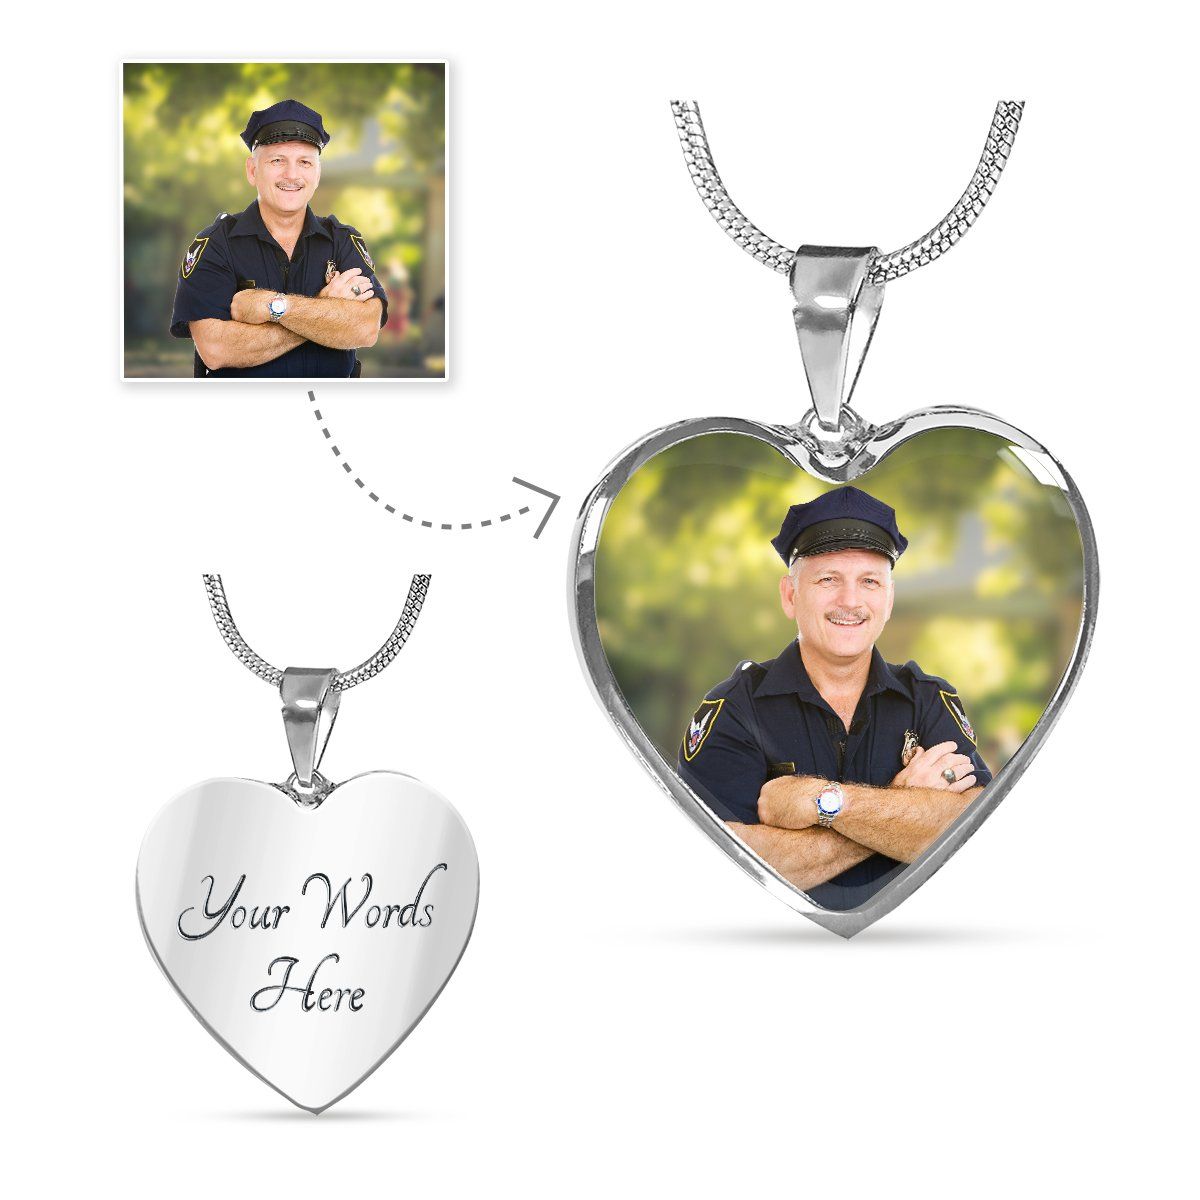 Law Enforcement Personalized Photo Heart Necklace - Heroic Defender